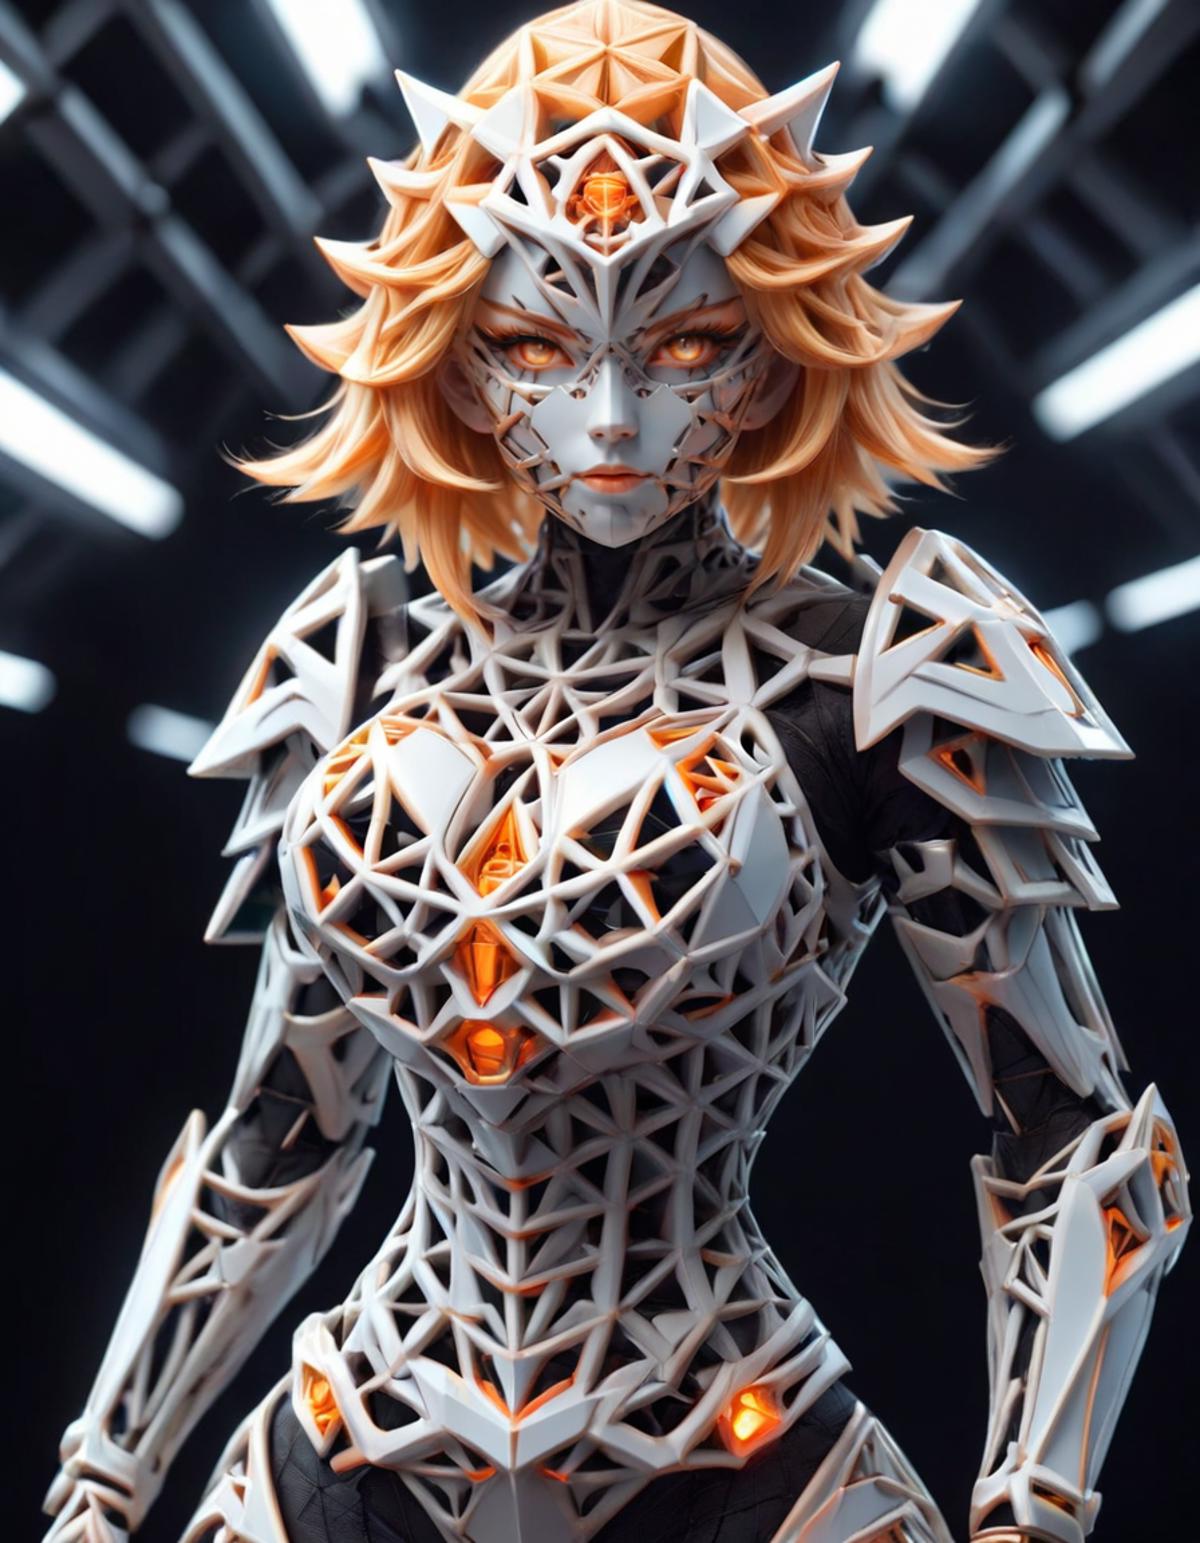 A 3D model of a woman with a unique armor design, including a helmet with orange eyes.